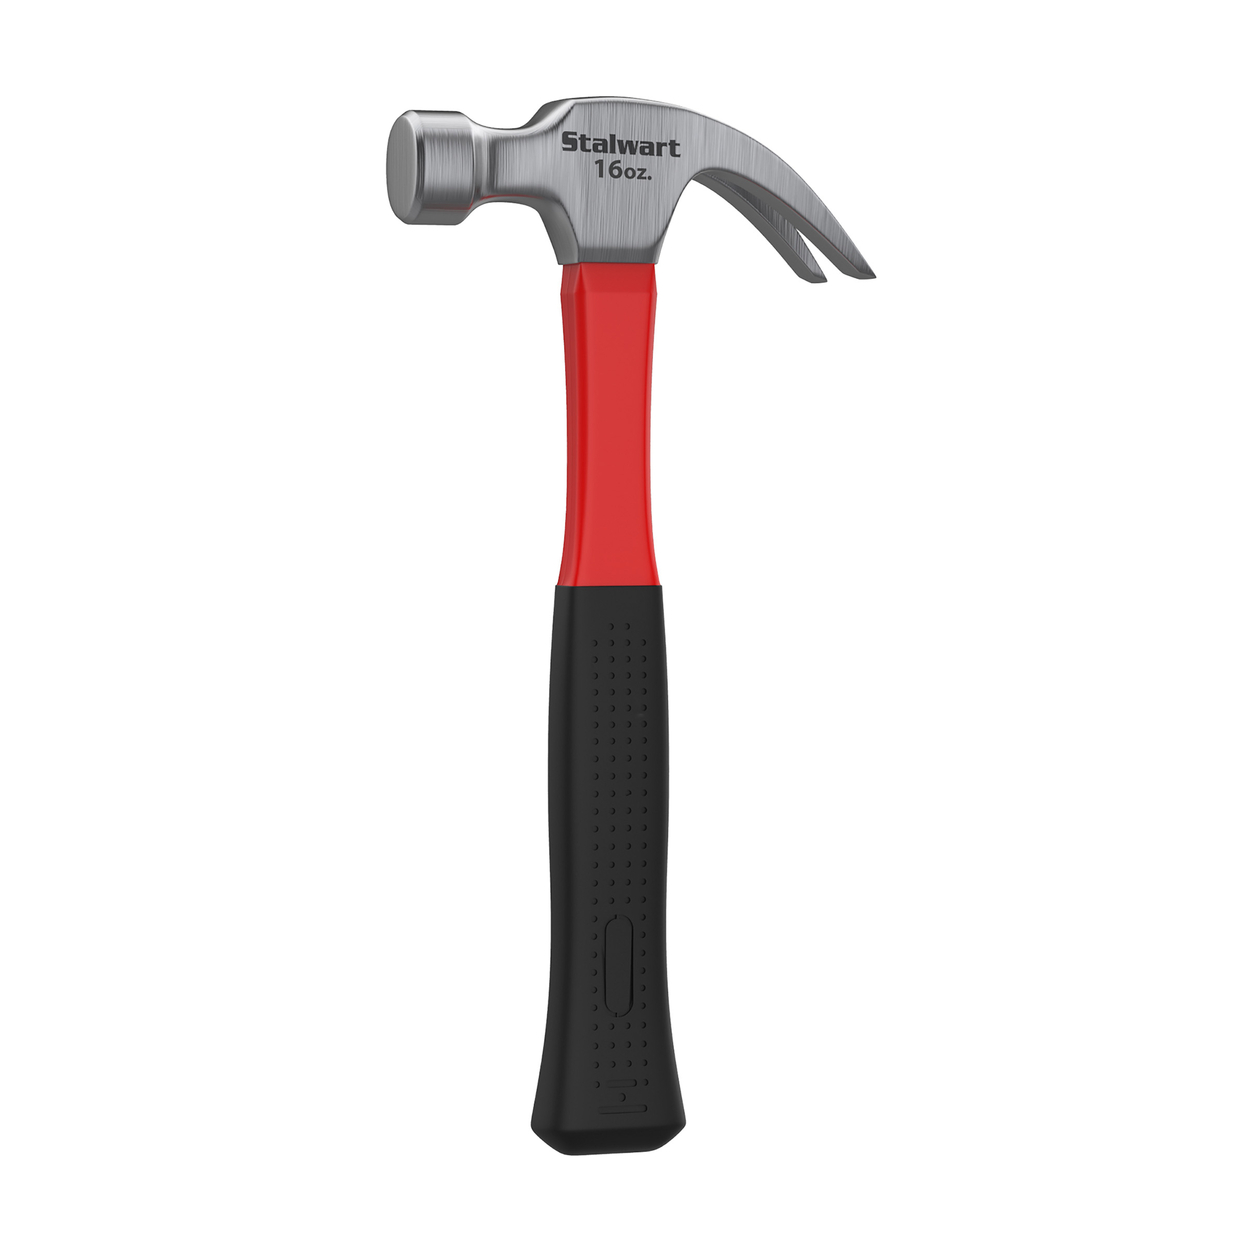 Fiberglass Claw Hammer With Comfort Grip Handle And Curved Rip Claw, 16 Oz